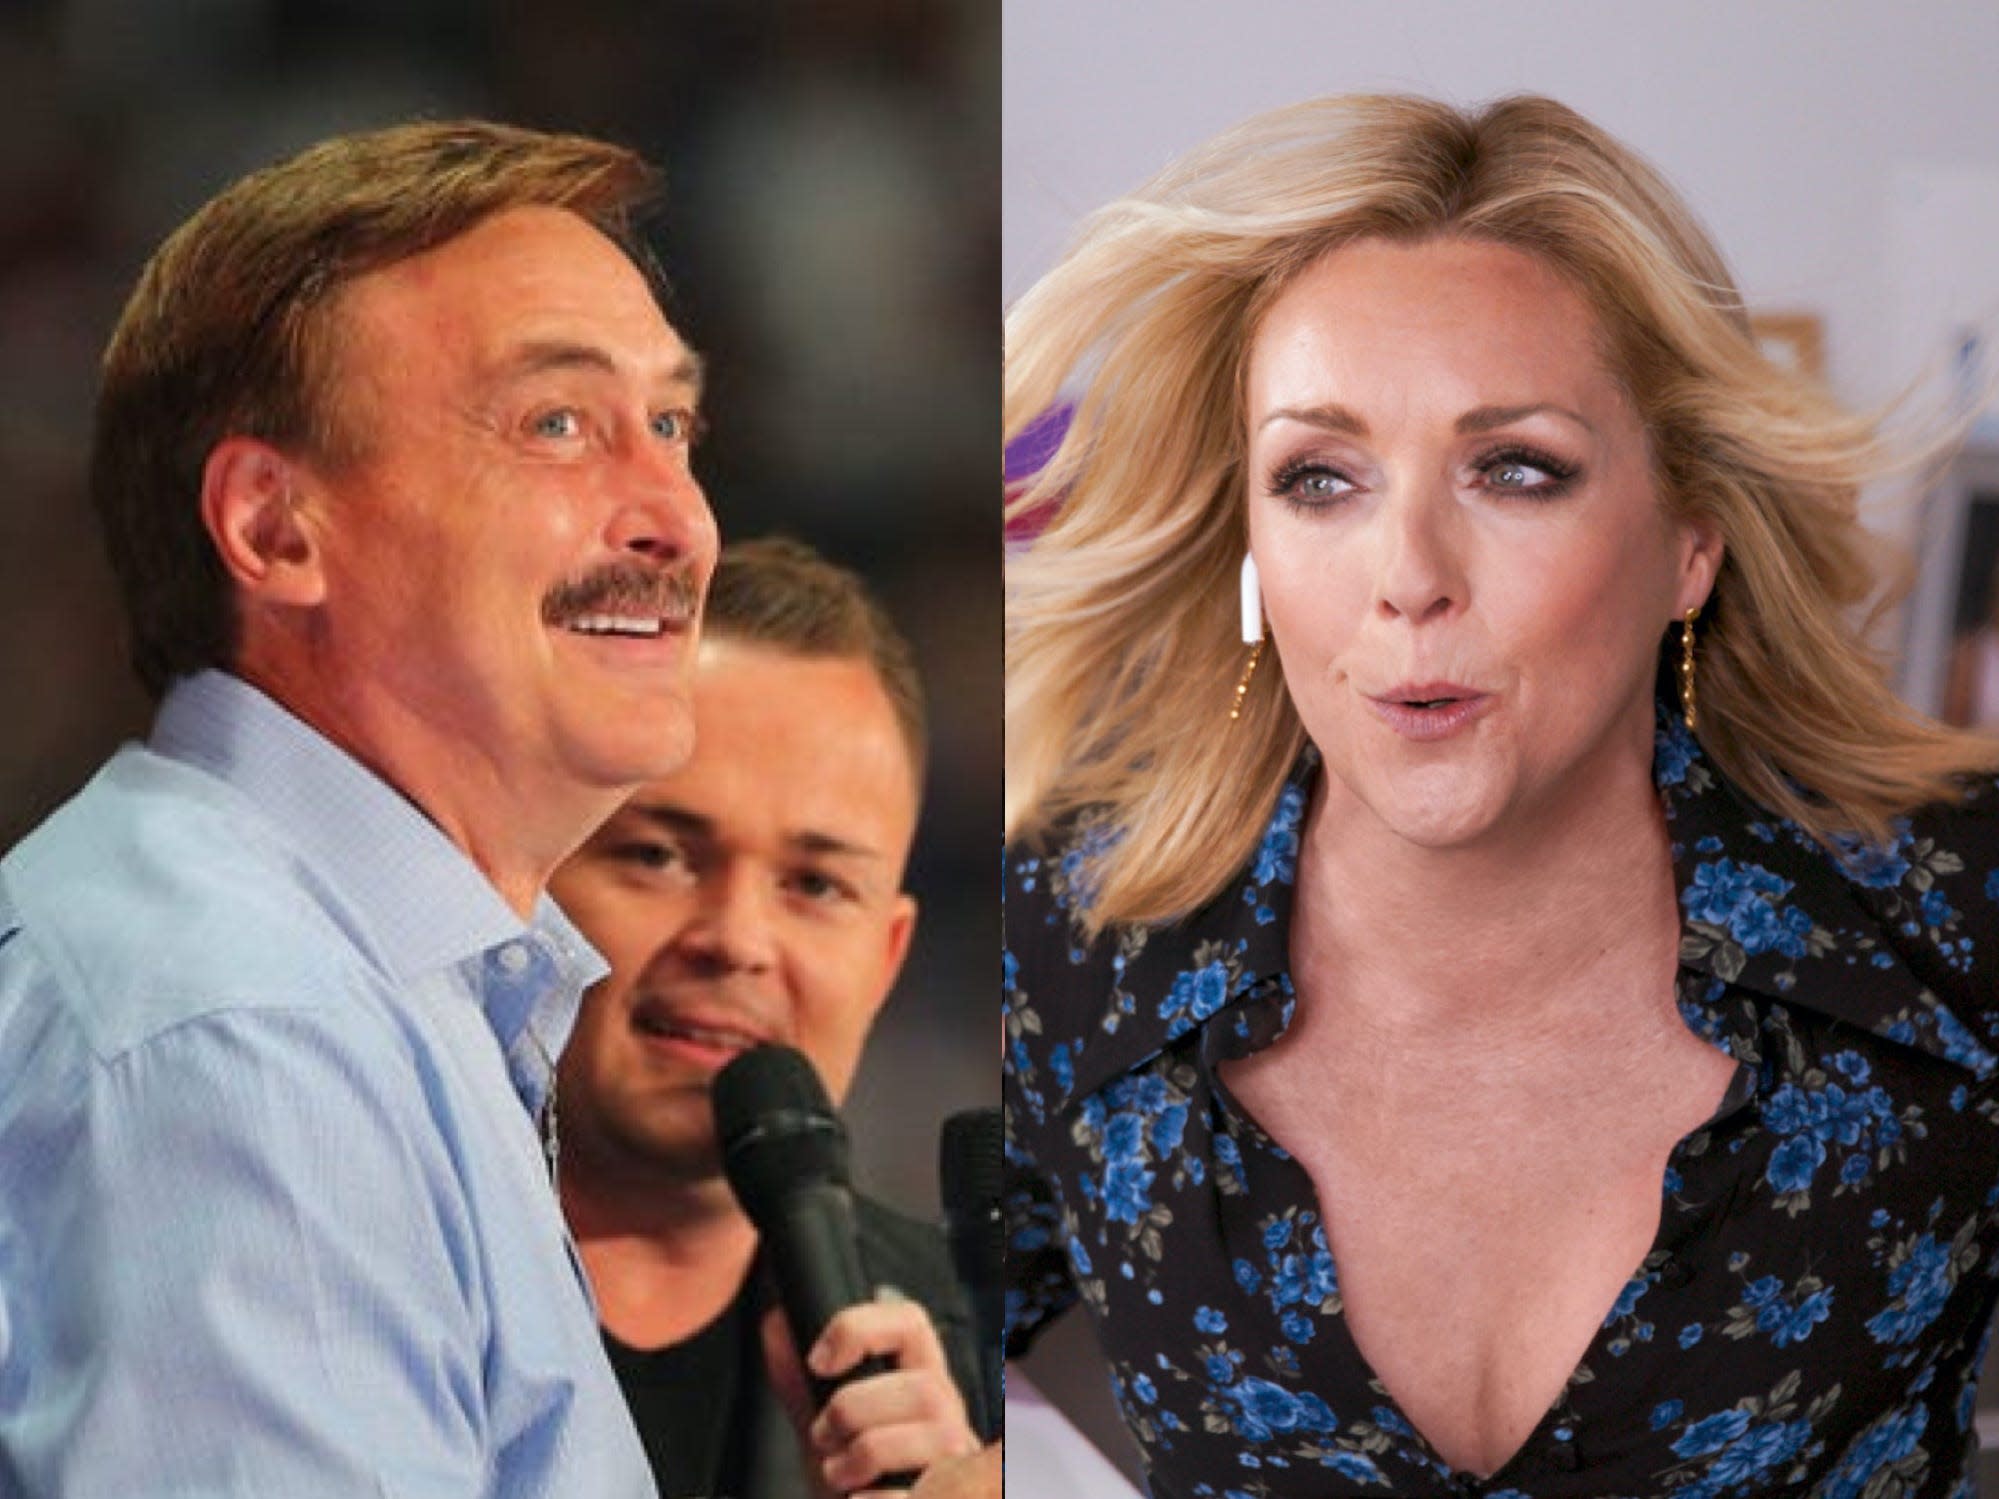 MyPillow CEO threatens to sue the Daily Mail after he said he had a ‘passionate romance’ with actress Jane Krakowski